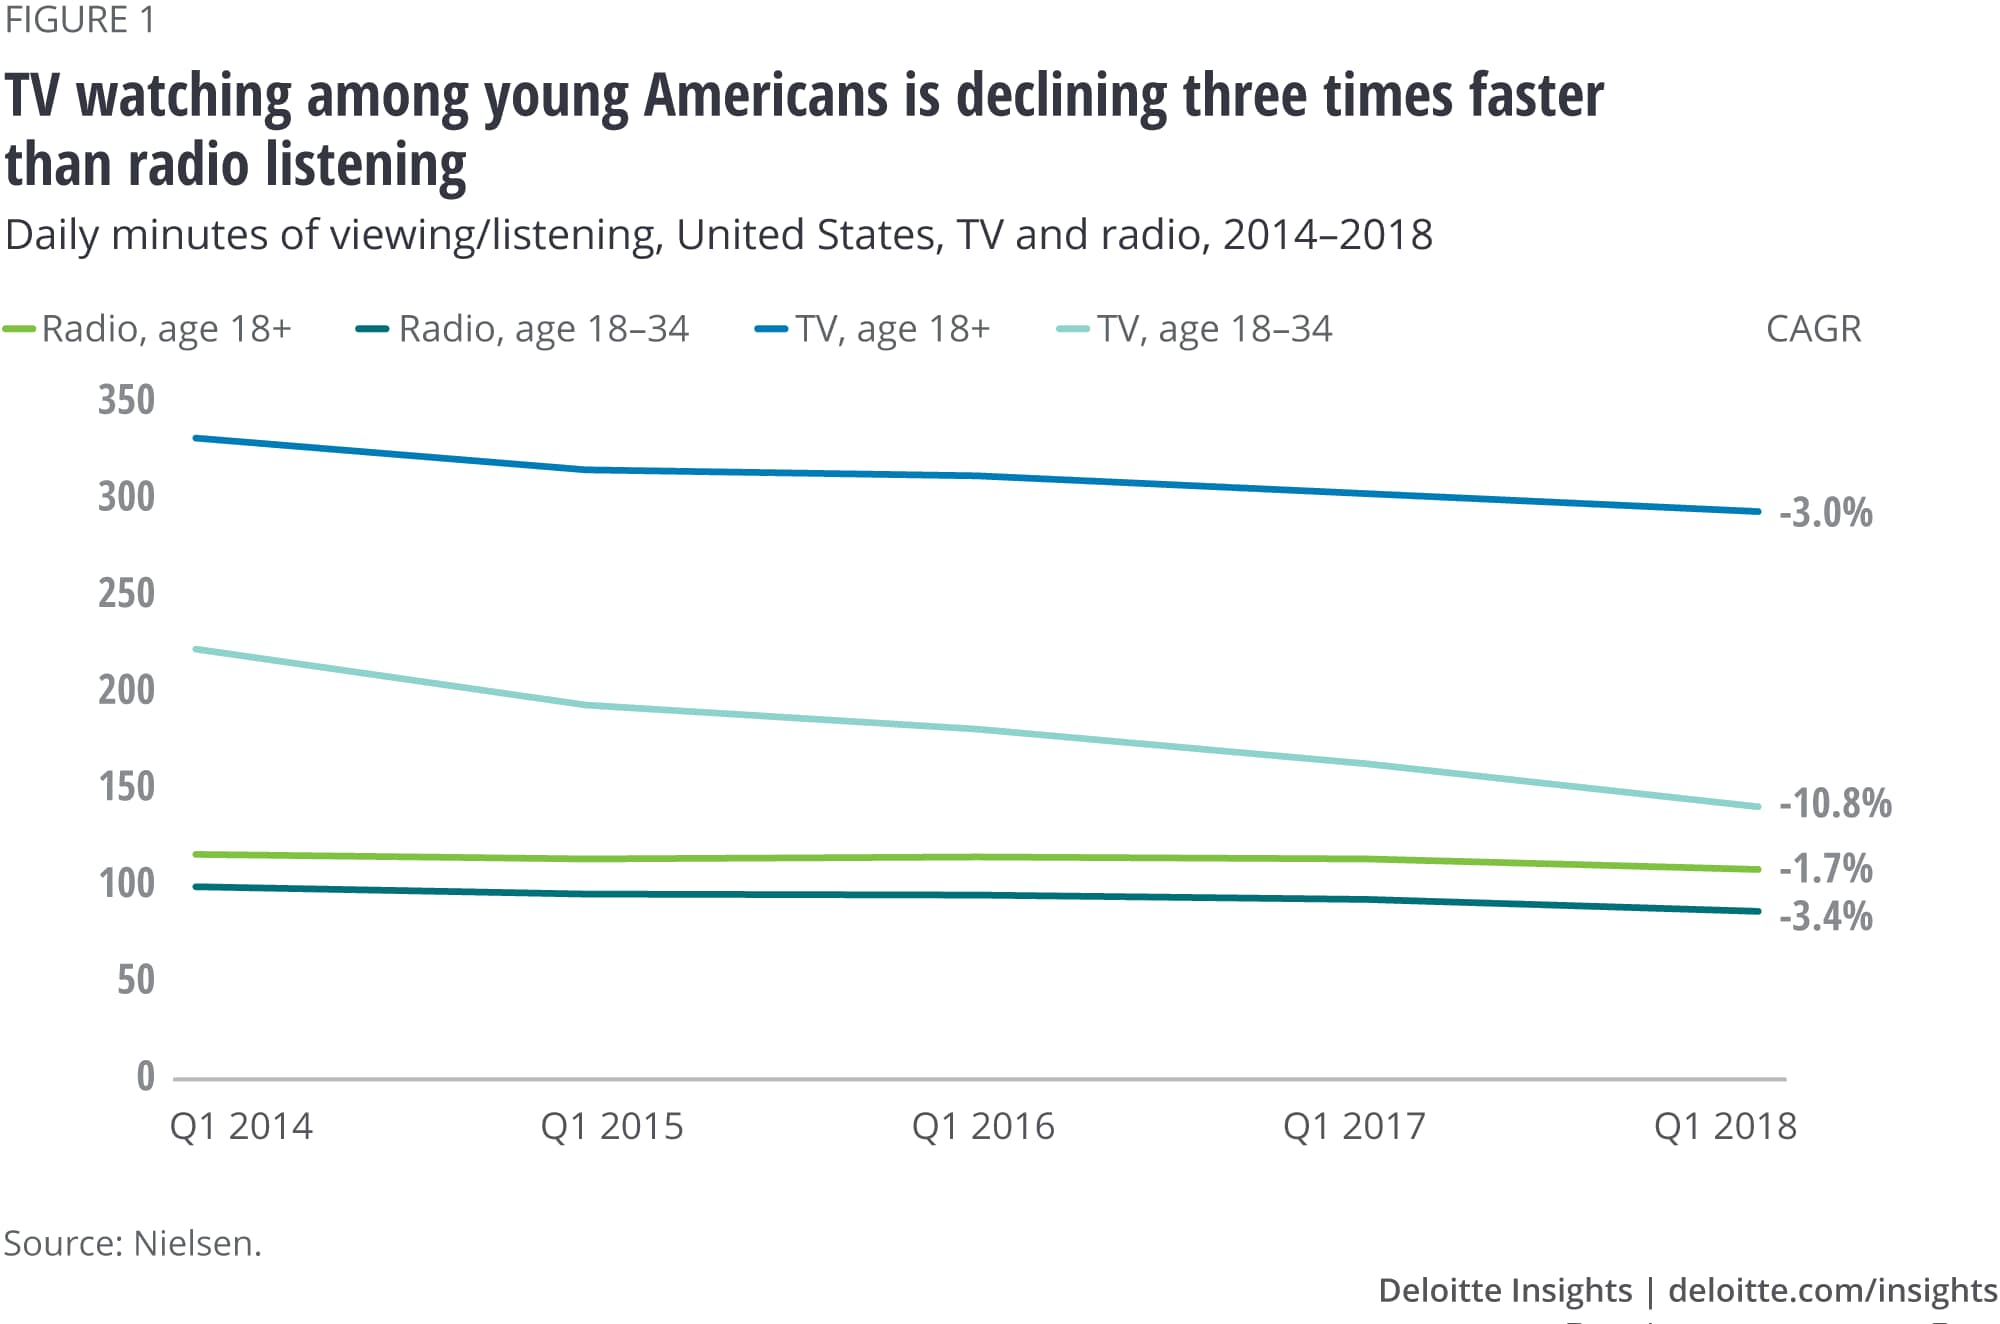 TV watching among young Americans is declining three times faster than radio listening